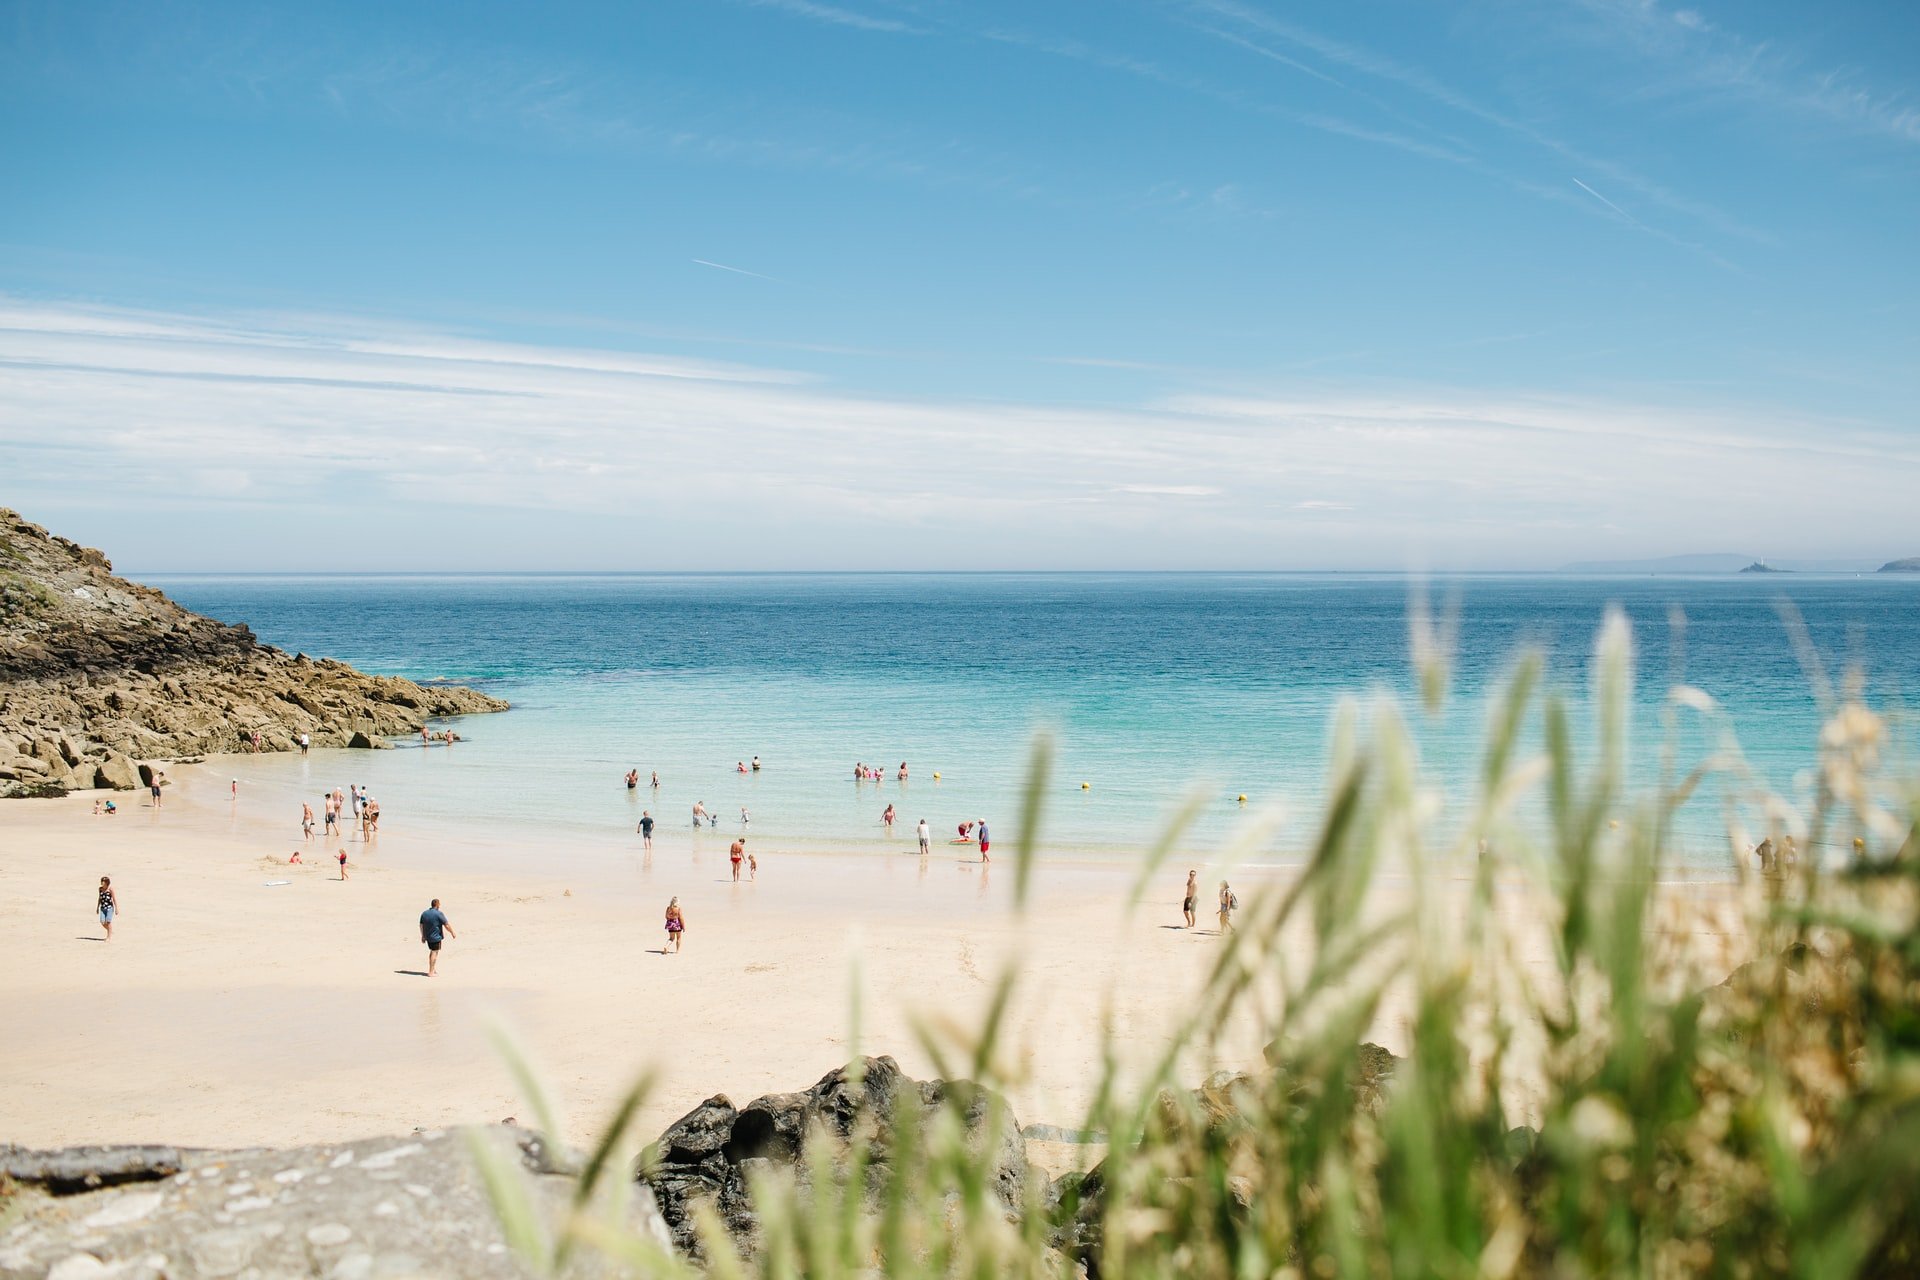 Lots of British beaches make perfect staycation ideas for the whole family.